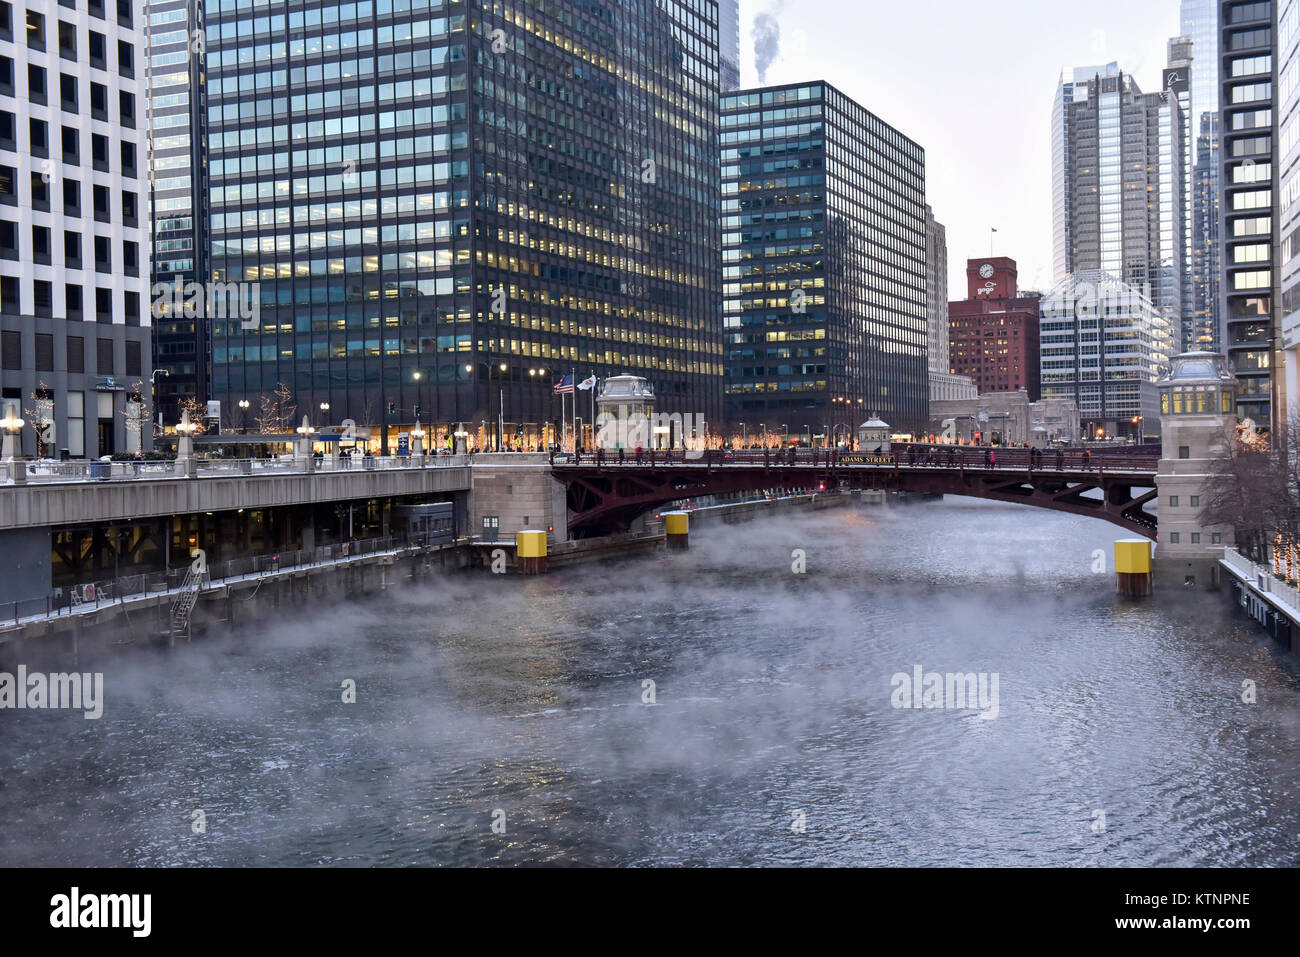 Chicago, USA. 27th Dec, 2017. USA Weather: Steam rises off the Chicago River as the city of Chicago experiences sub-zero temperatures. With the effects of wind chill, temperatures are expected to be -22C to -32C. Credit: Stephen Chung/Alamy Live News Stock Photo